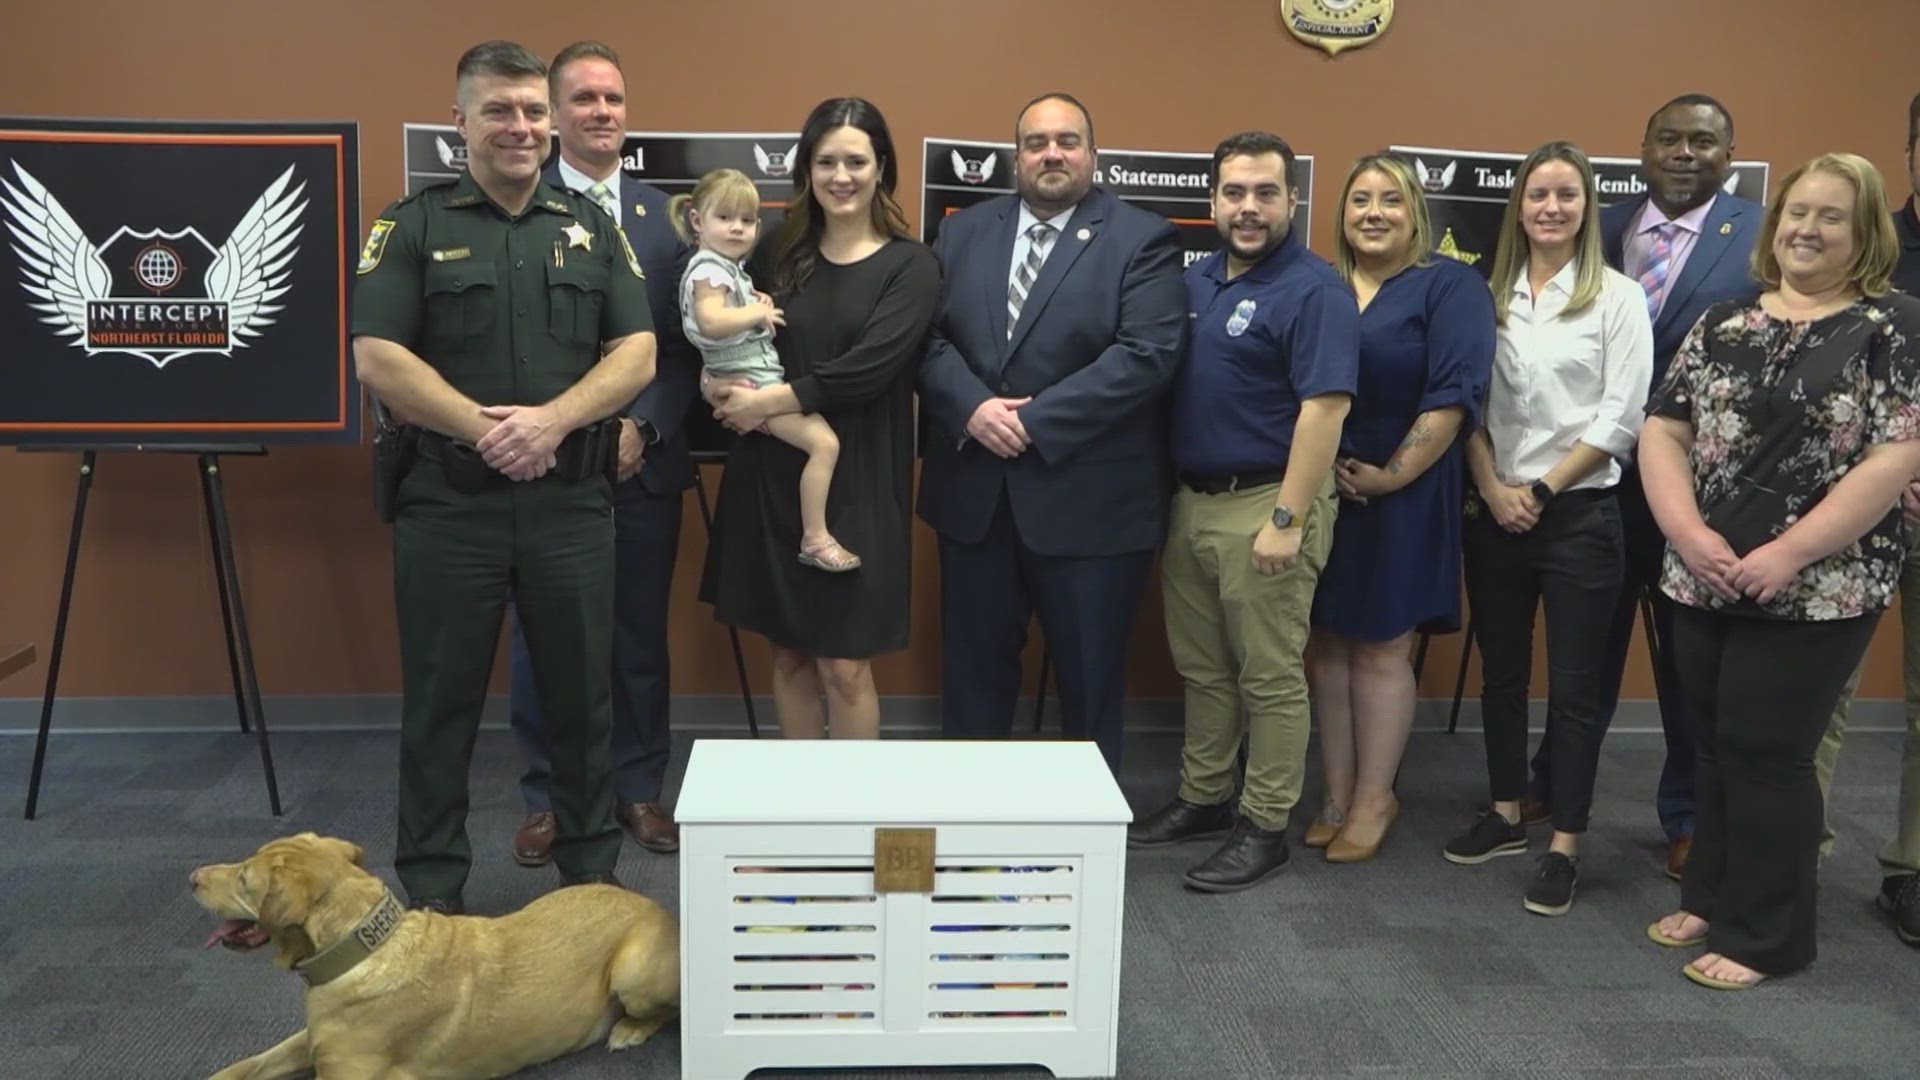 On Friday, Bridegan's widow Kirsten along with their youngest daughter, London, delivered the 50th Bexley Box to the Homeland Security Investigations office.